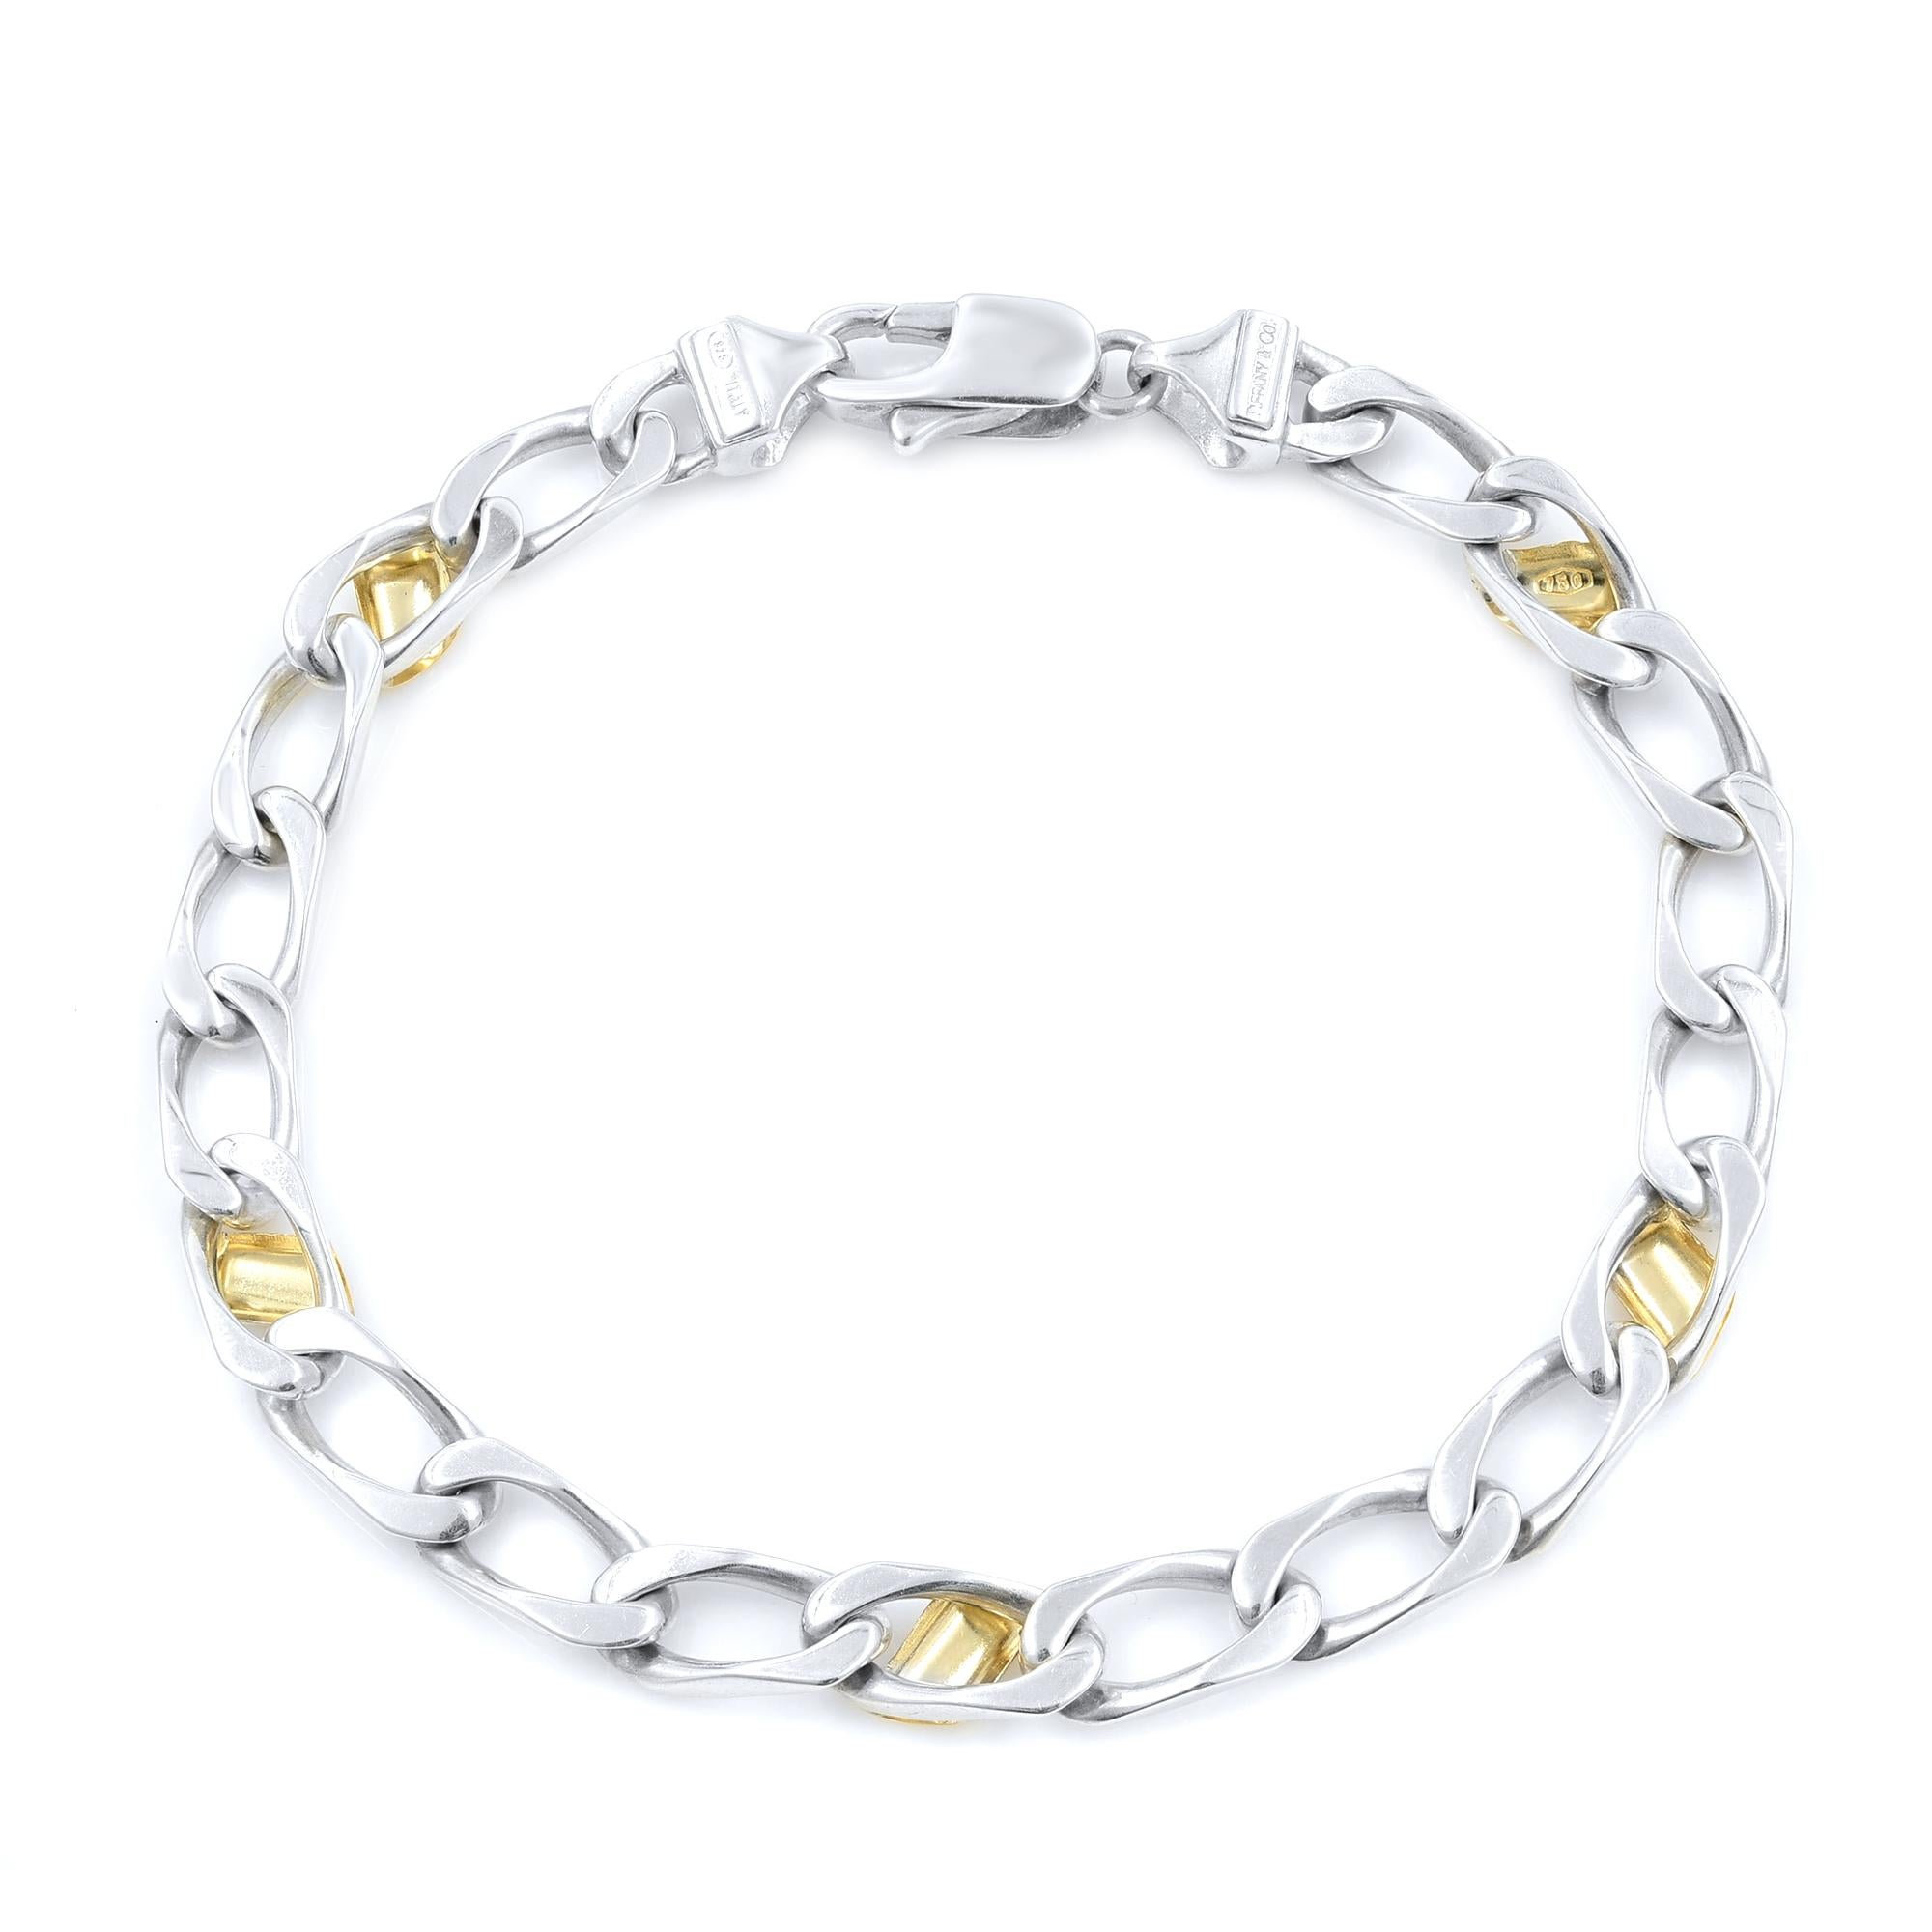 A pre-owned like new Tiffany & Co. 18K Yellow Gold & 925 Sterling Silver Cuban Link Bracelet.
Comes with Tiffany pouch.
Clean. No imperfections. 
Length: 7.5 inch
Width: 5mm
Weight: 11 grams
Made in Italy.